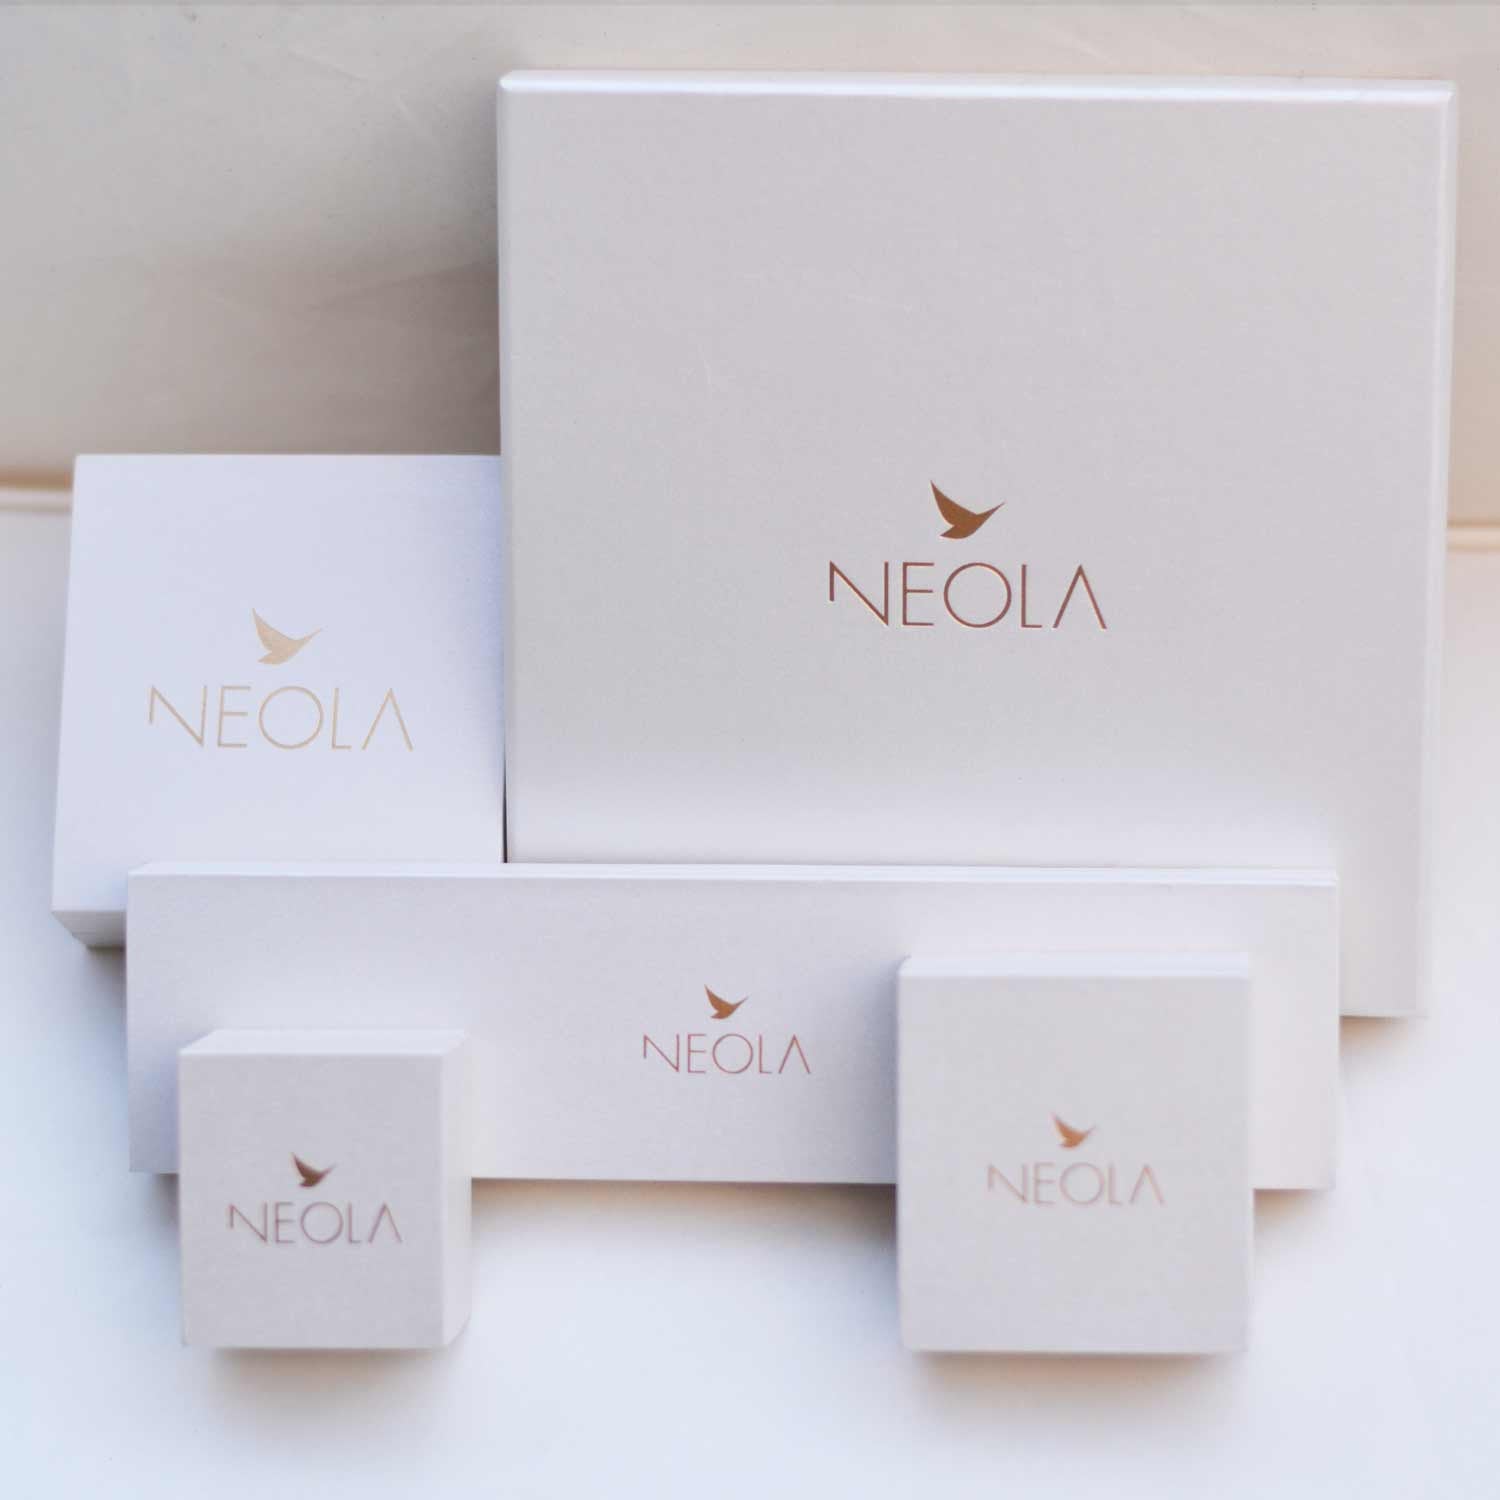 Rose Gold and Sterling Silver Earrings | Neola British Handmade Jewellery